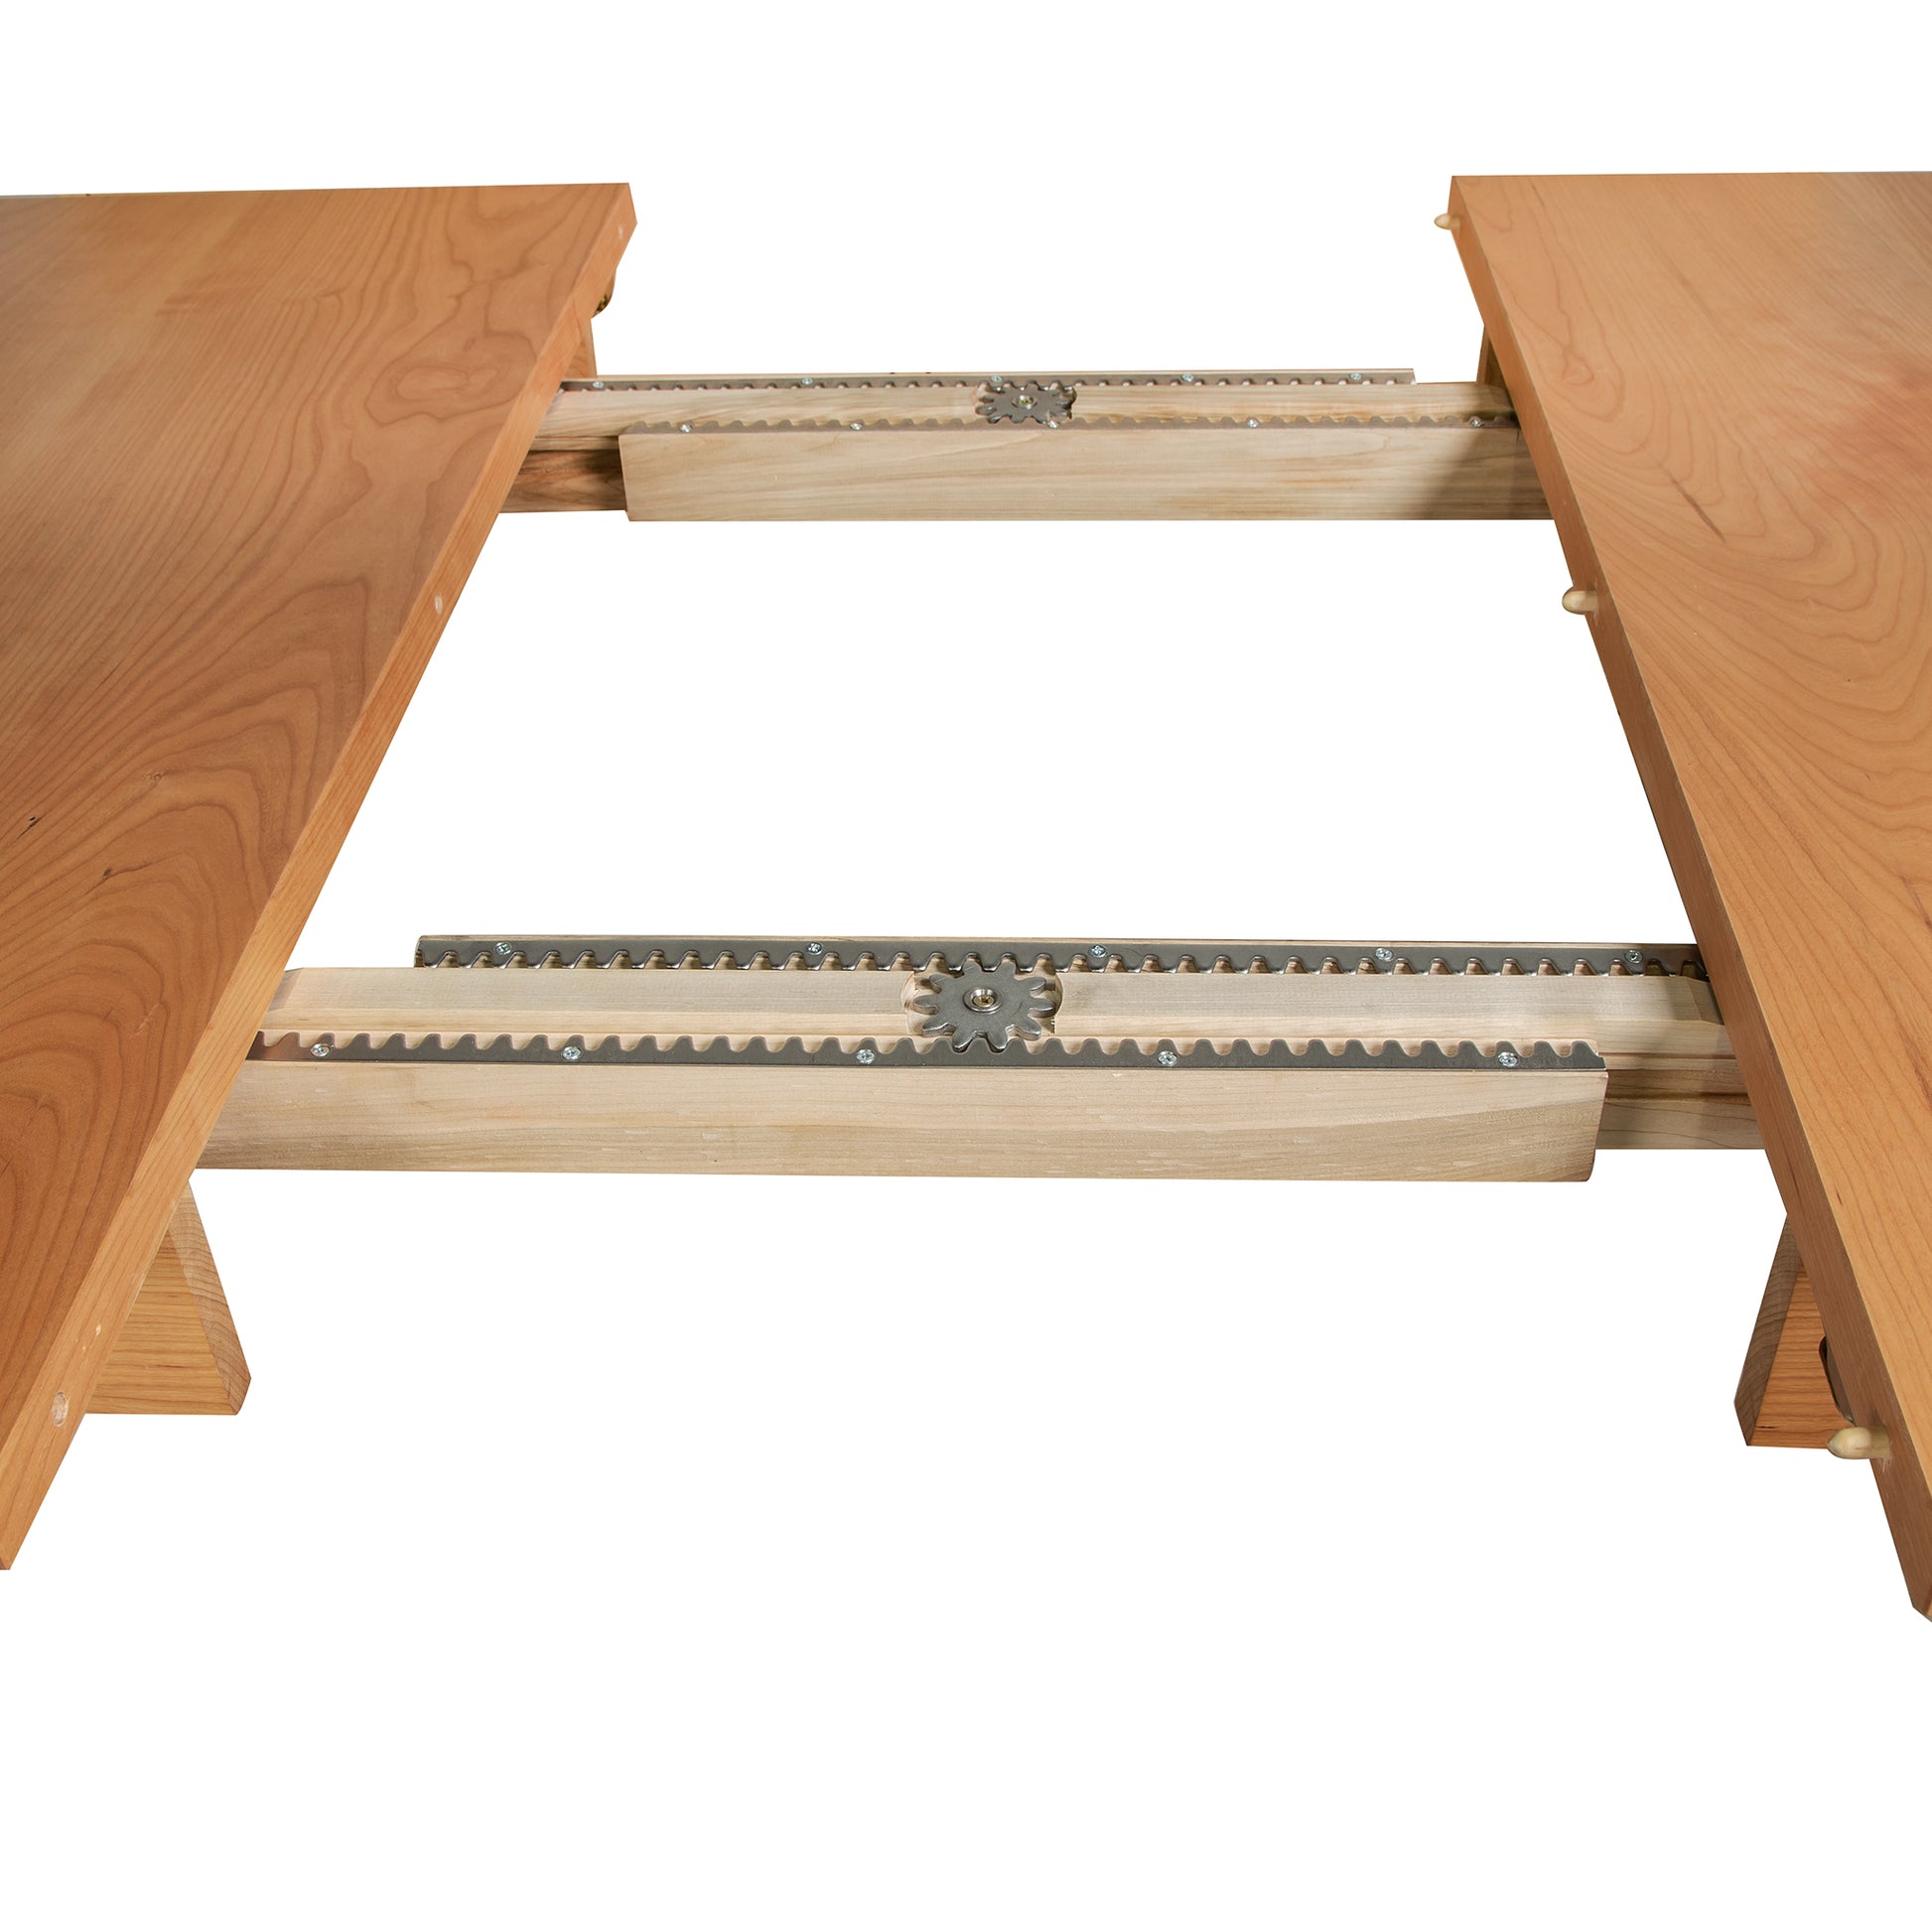 A picture of a Maple Corner Woodworks Vermont Shaker Rectangular Extension Dining Table with a table saw attached to it.